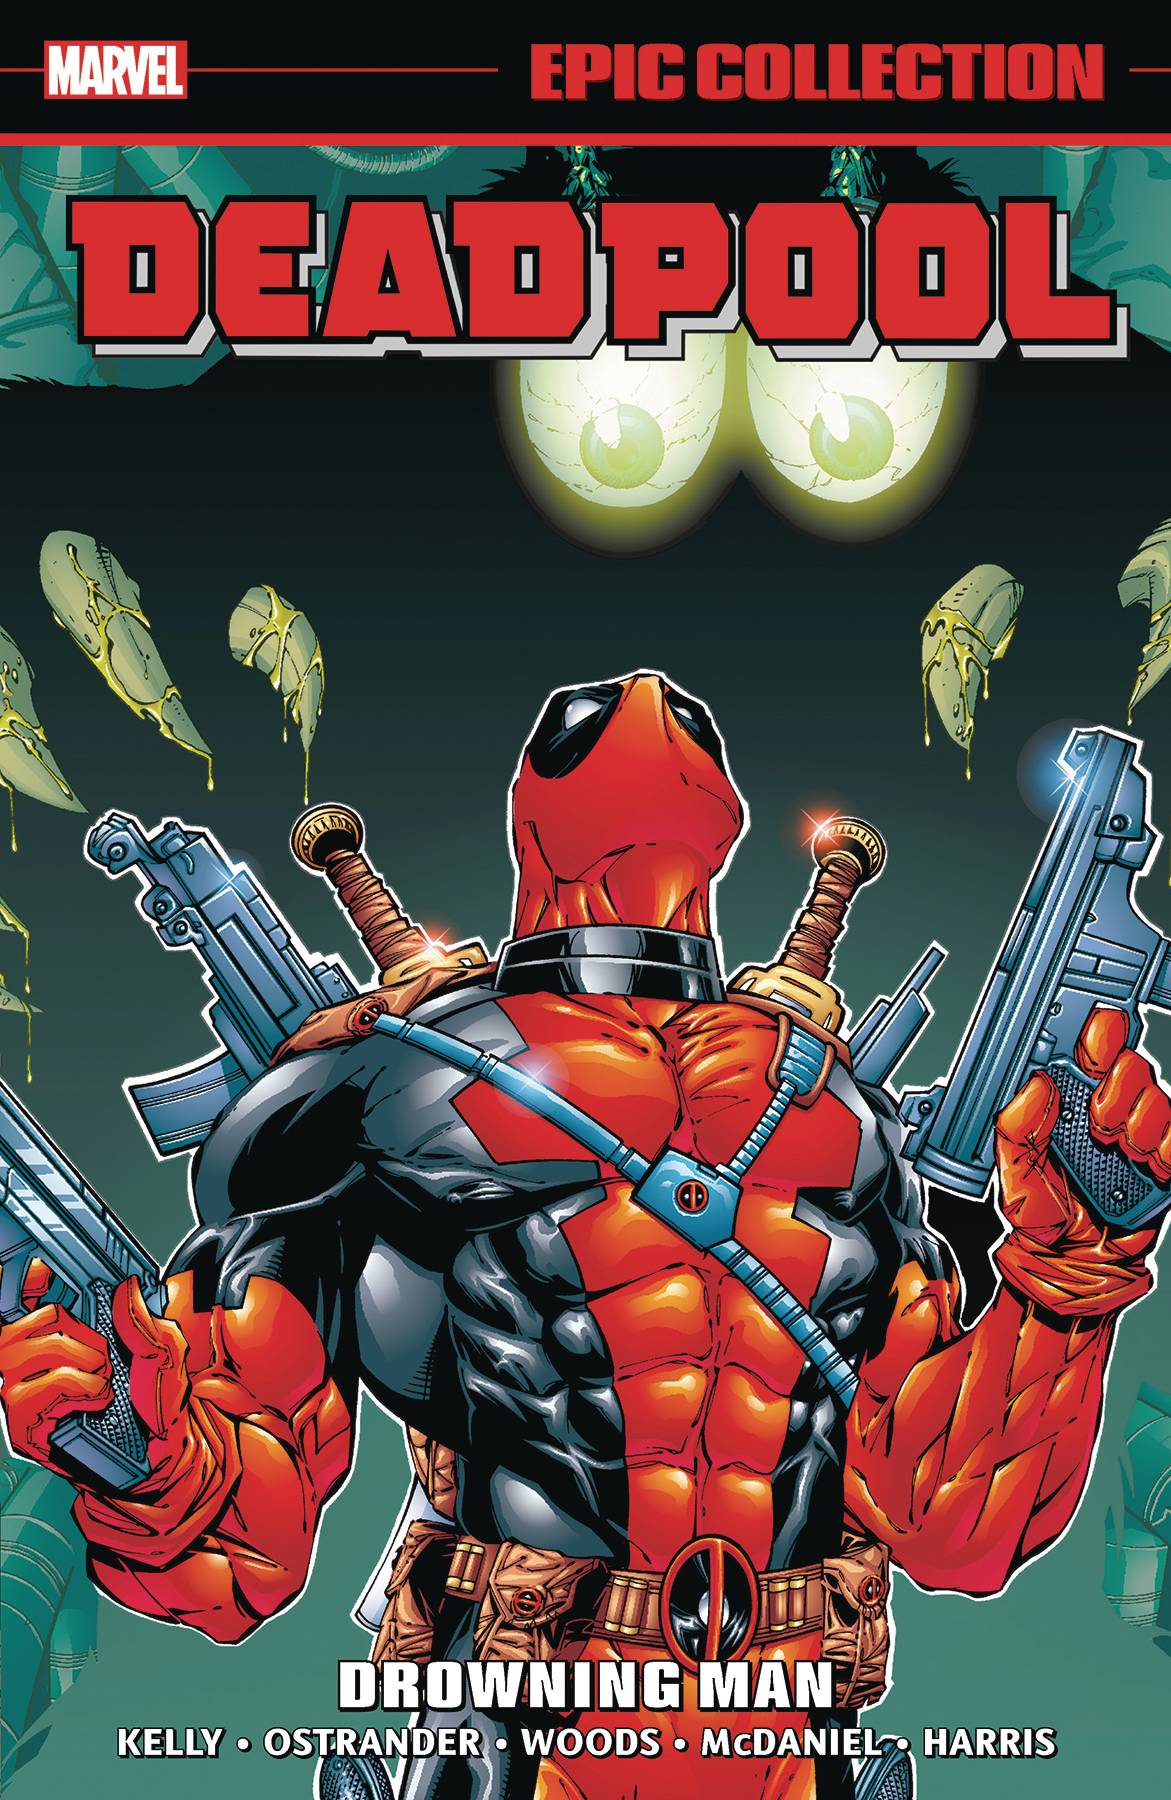 DEADPOOL EPIC COLLECTION TP VOL 03 DROWNING MAN